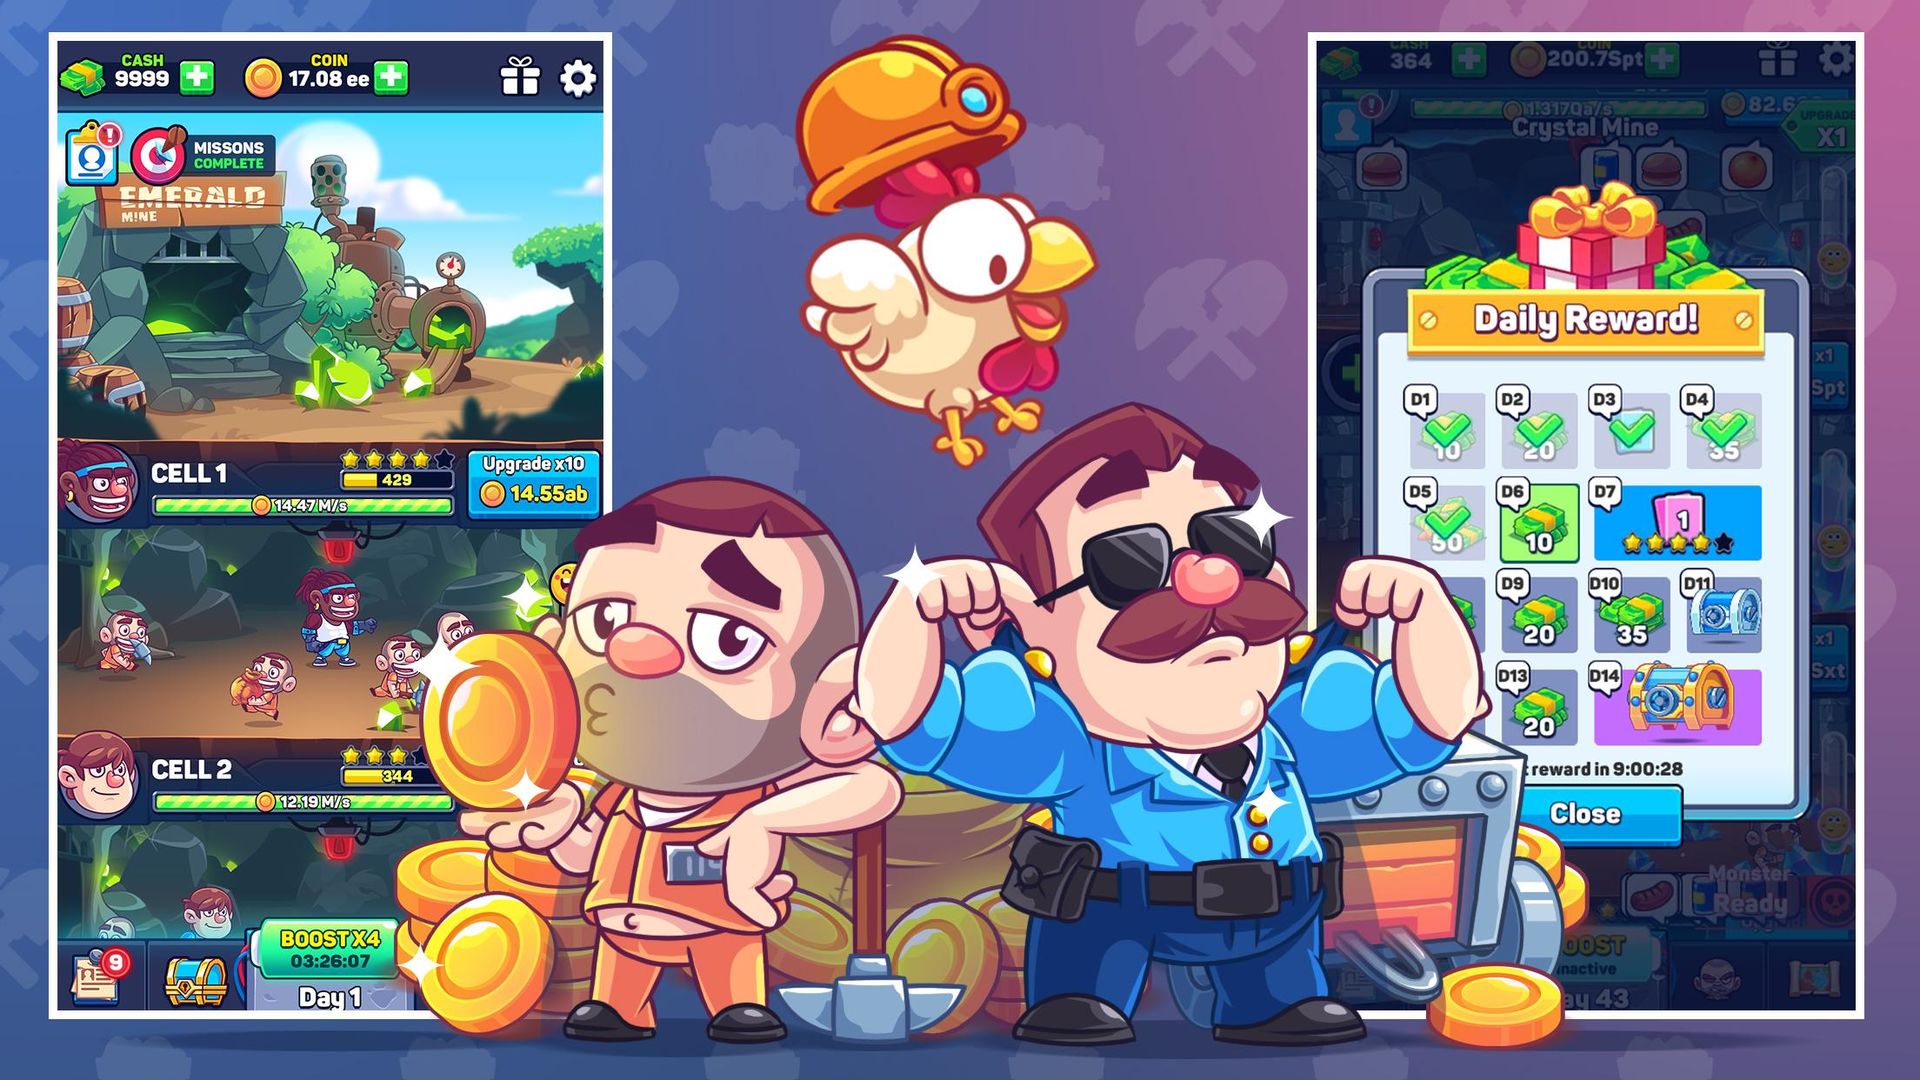 Screenshot of Idle Prison Tycoon: Gold Miner Clicker Game